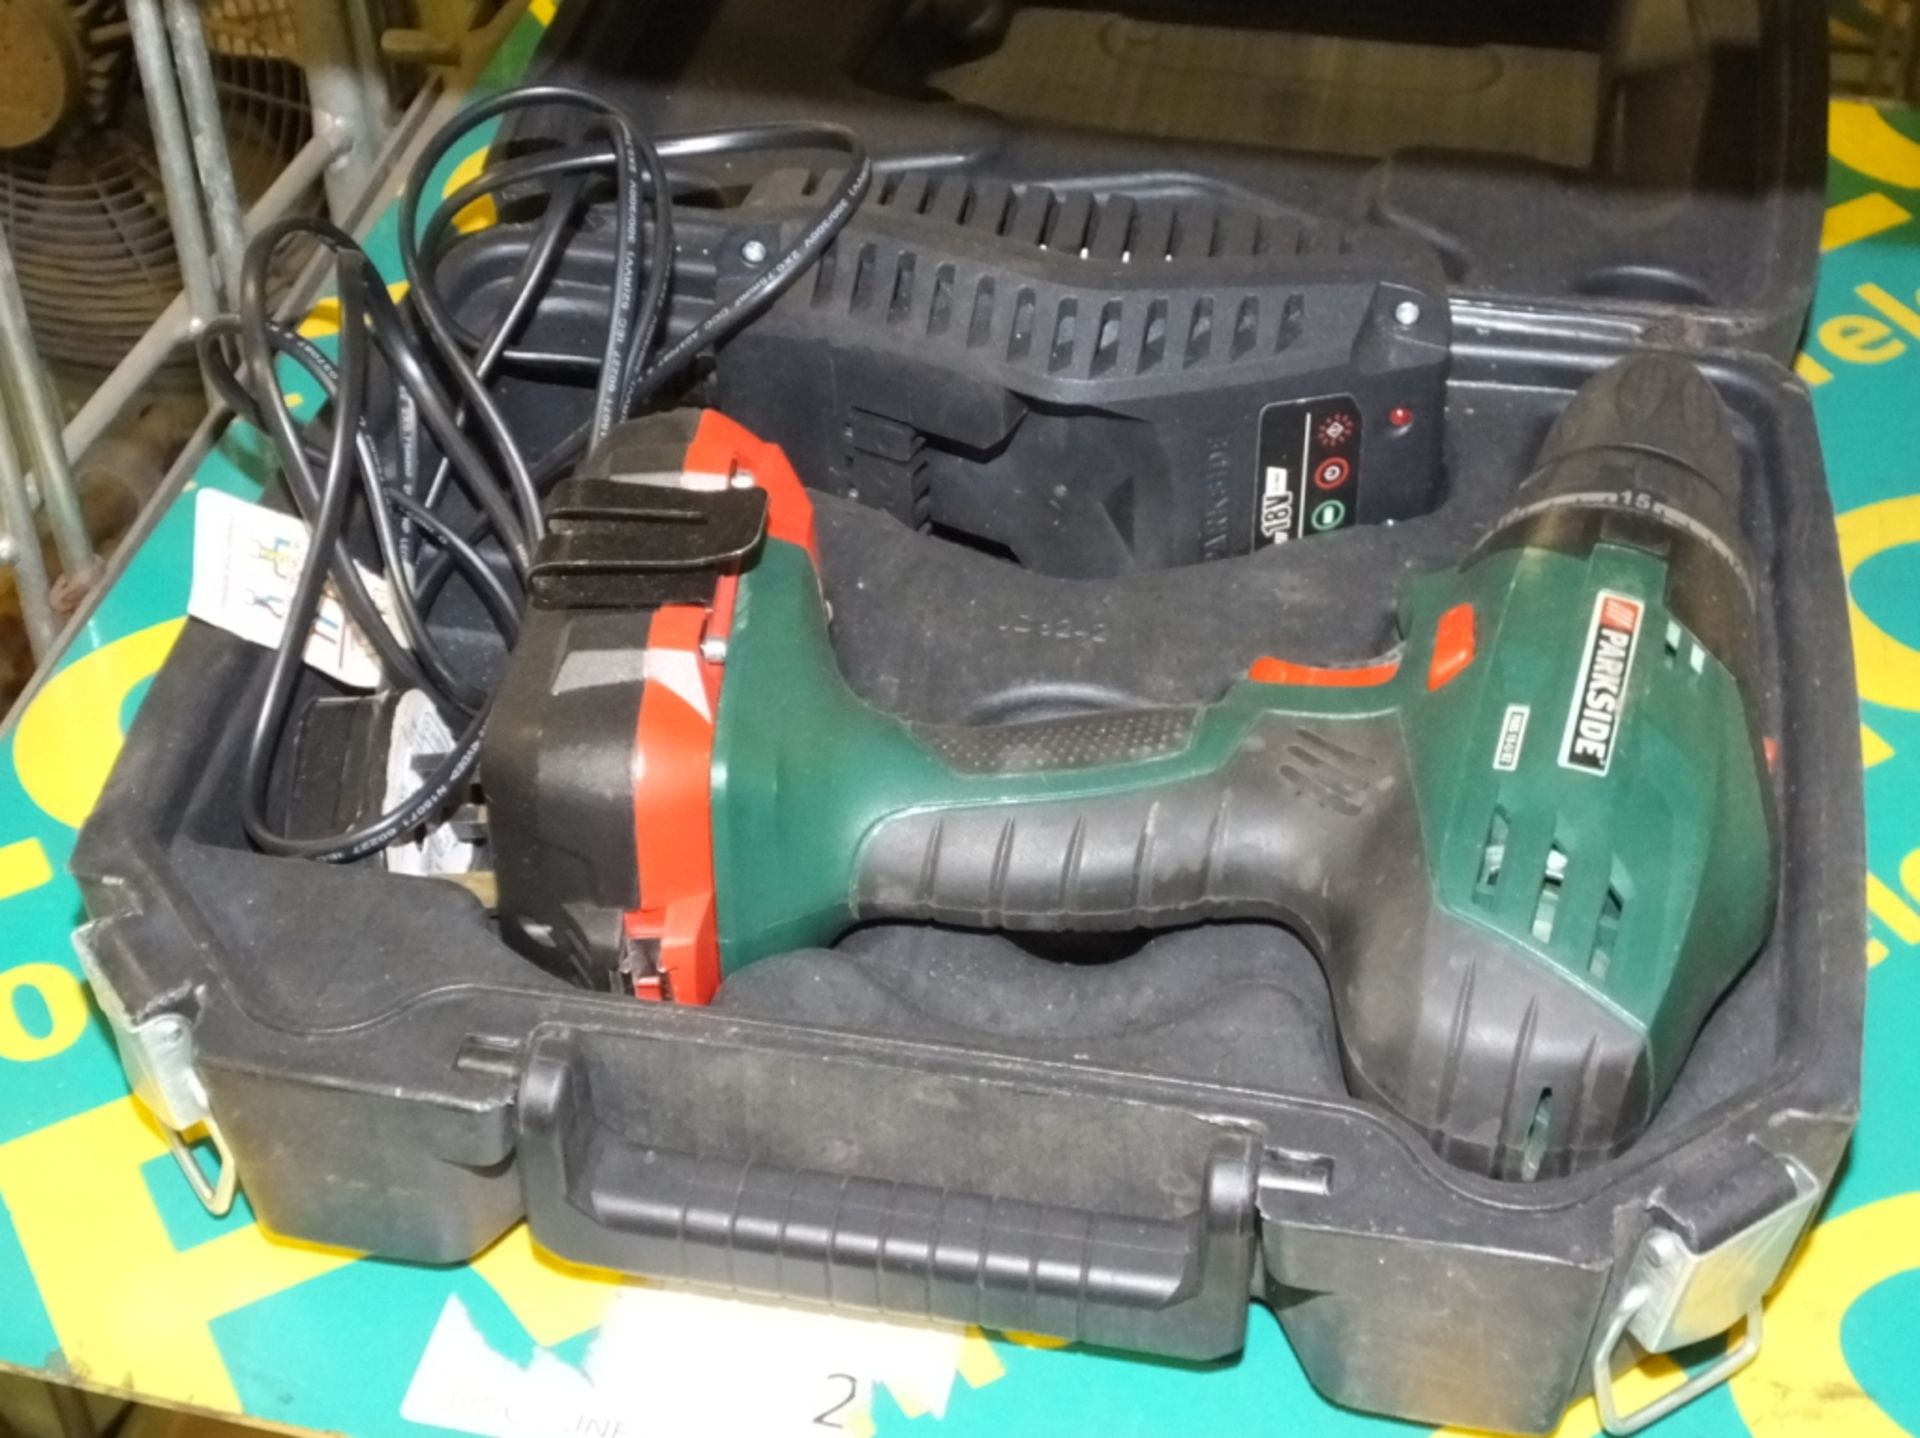 Makita HP2041 power drill in case, Parkside PABS-18-Li-B2 cordless drill - 1 battery, 1 ch - Image 3 of 3